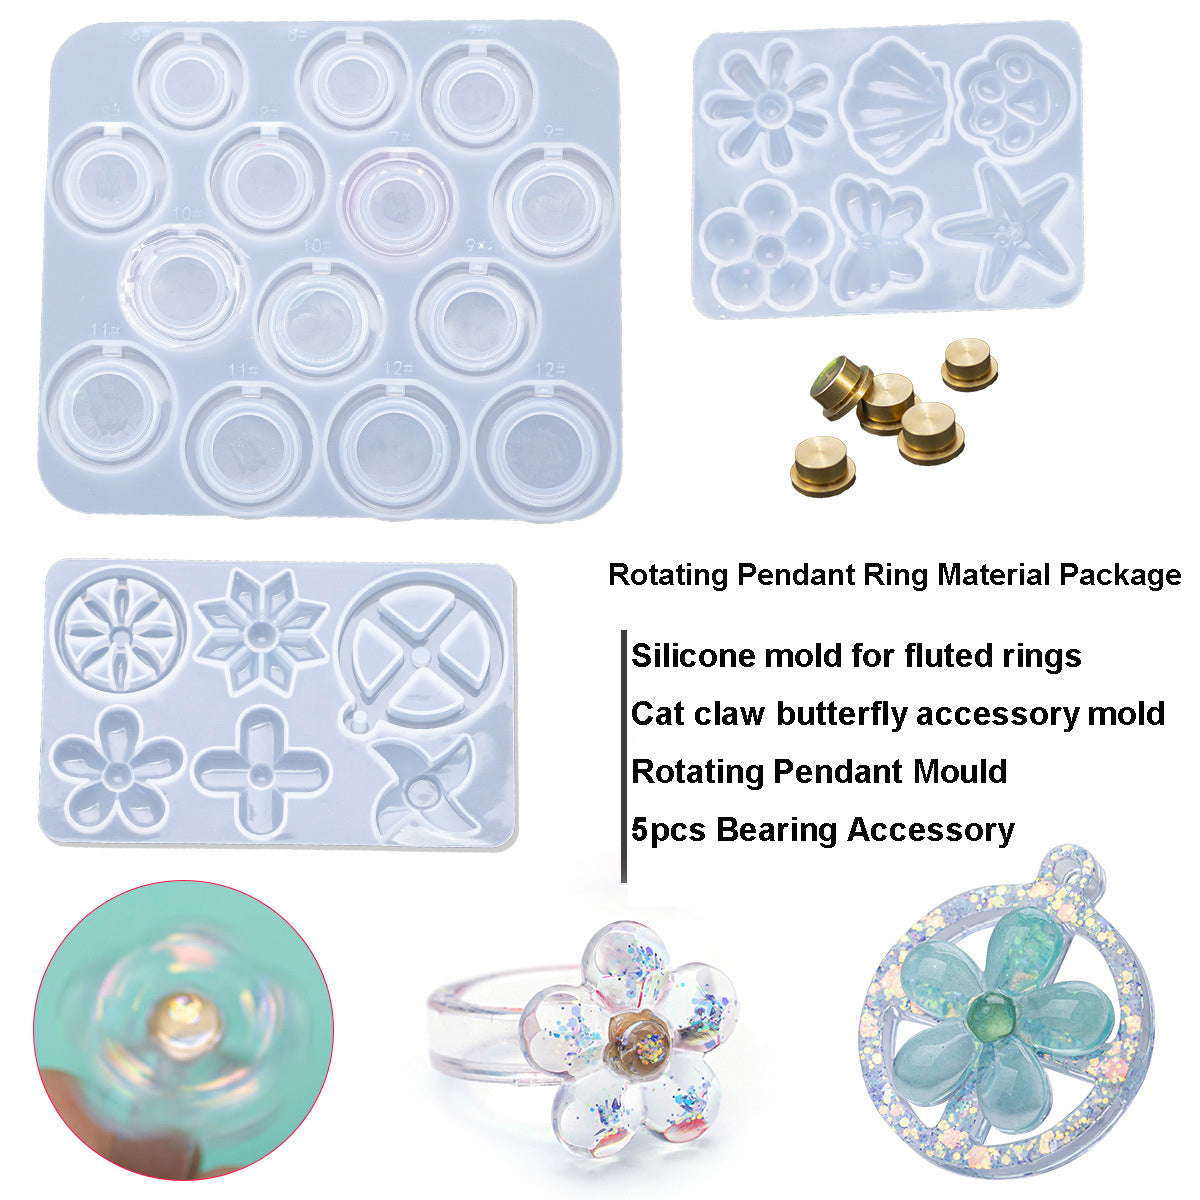 Circle Silicone Resin Mold - 12 in 1